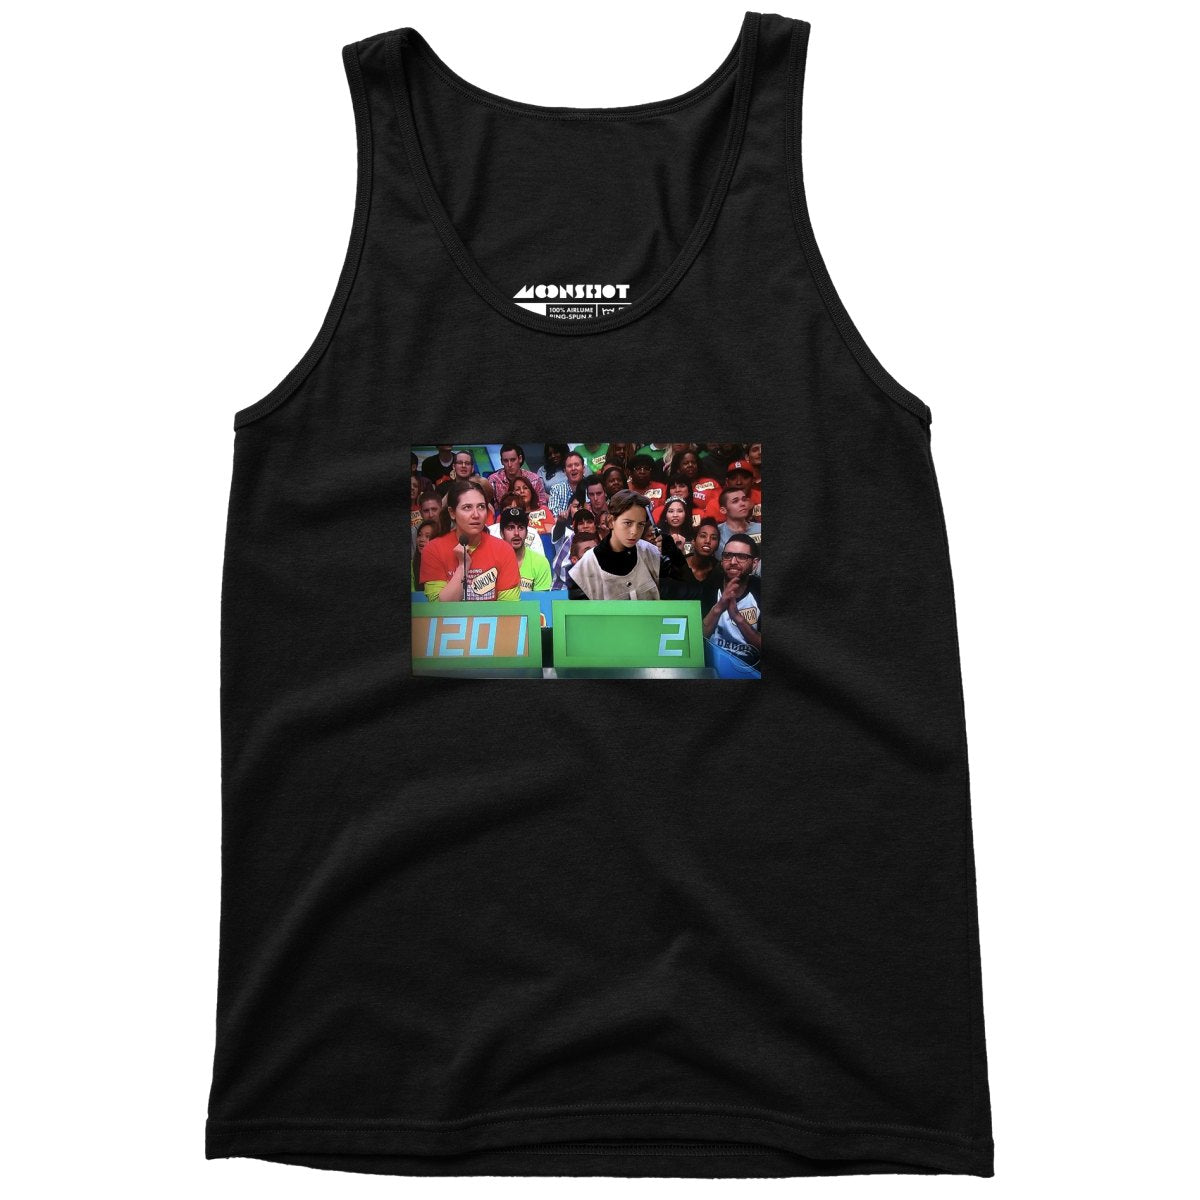 Better Off Dead The Price is Right Mashup - Unisex Tank Top